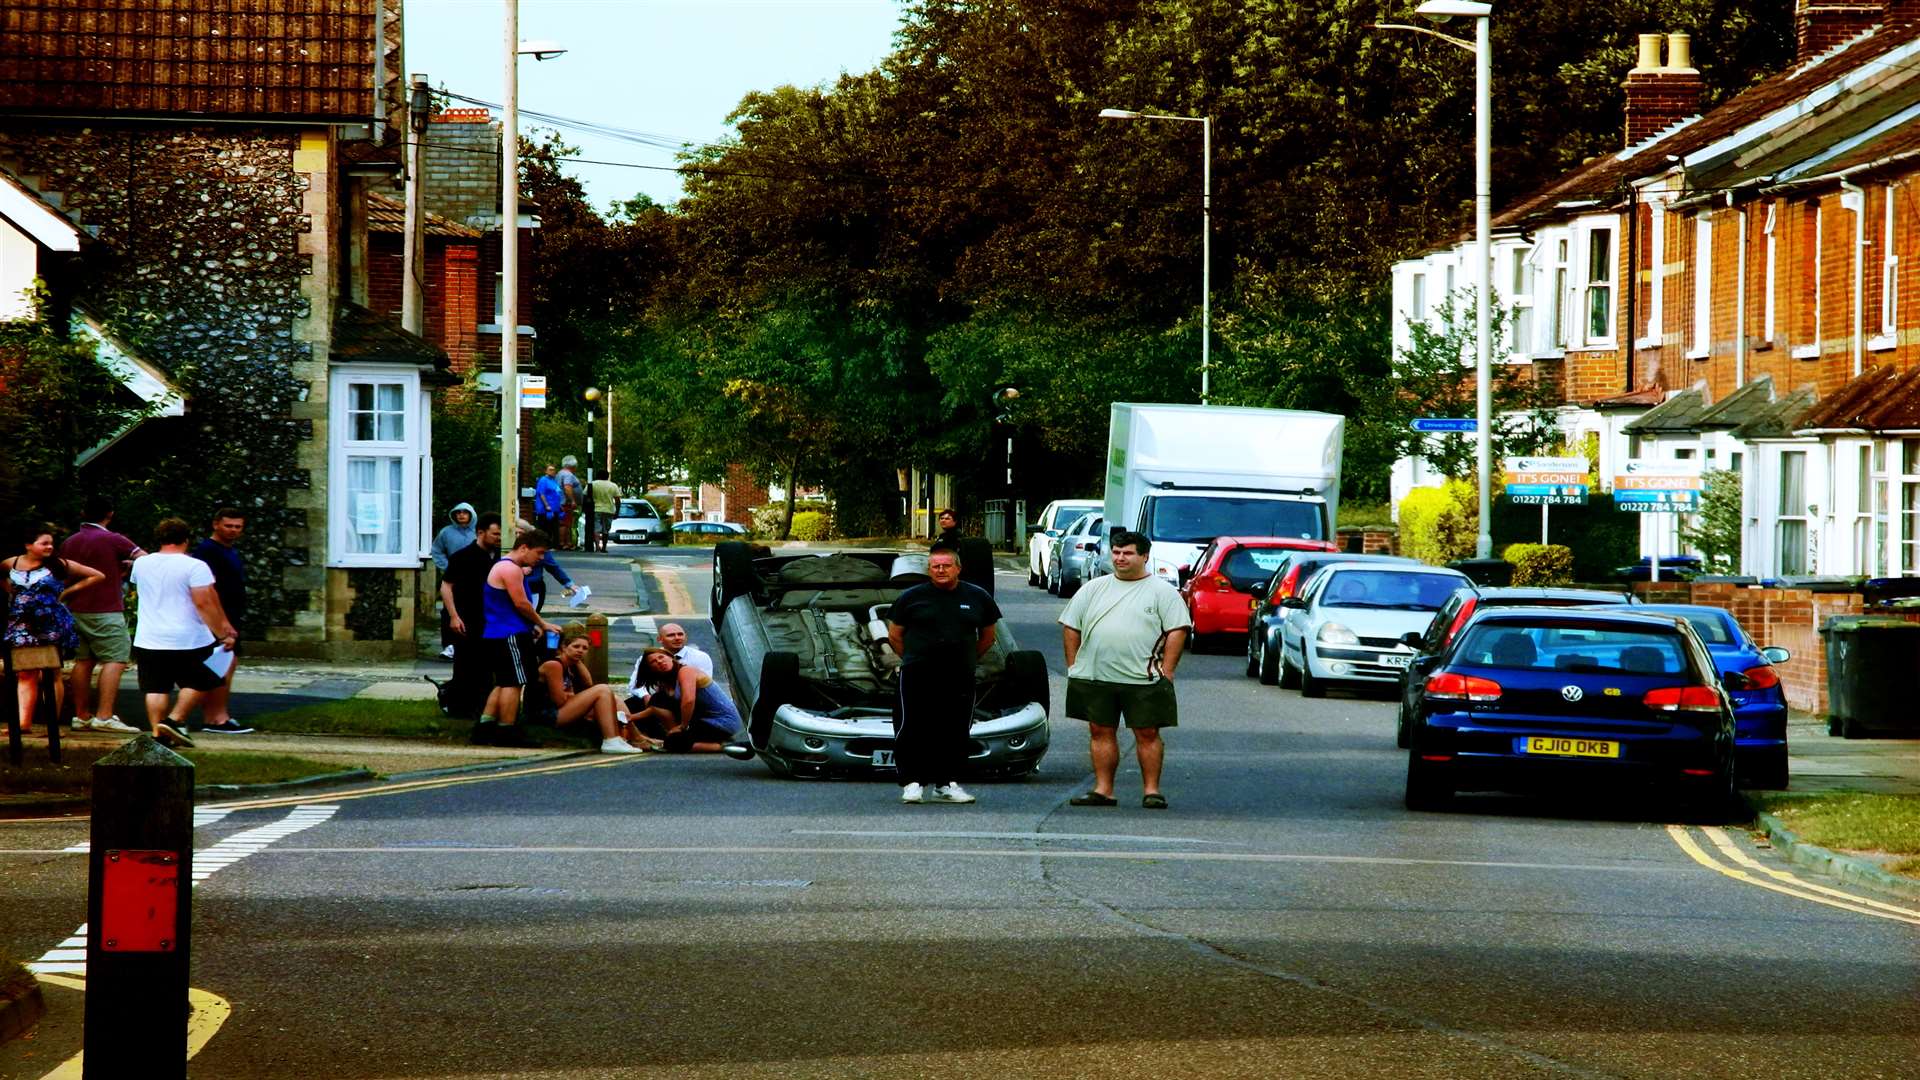 The scene of the accident in Beaconsfield Road, Canterbury, photographed by Canterbury Ghost Tour operator John Hippisley